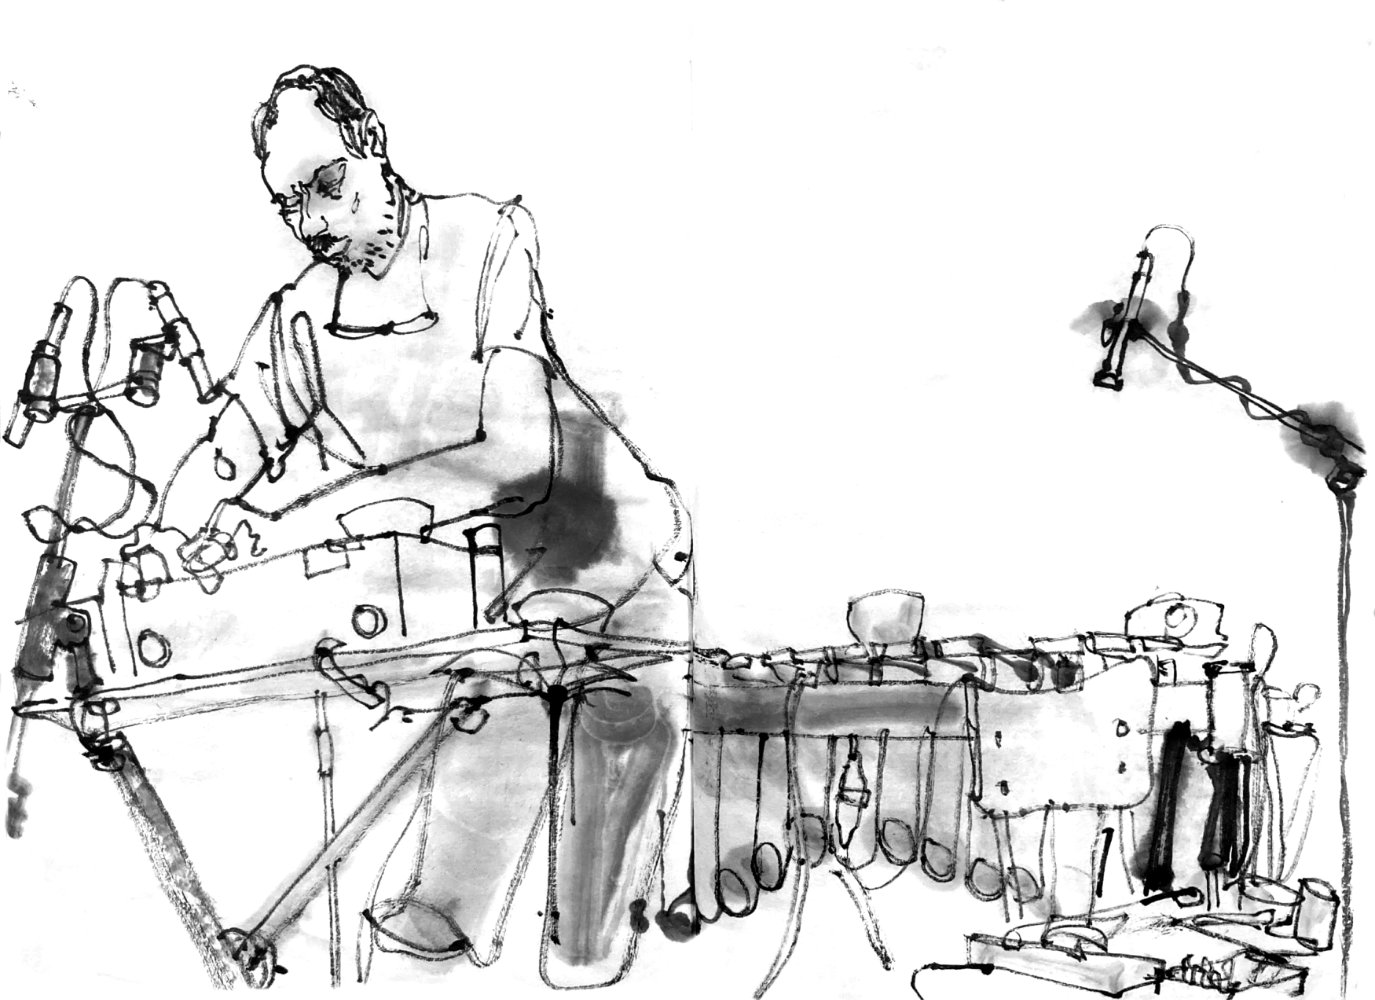 inkdrawing of a musician on stage, standing behind some electro-acustic device